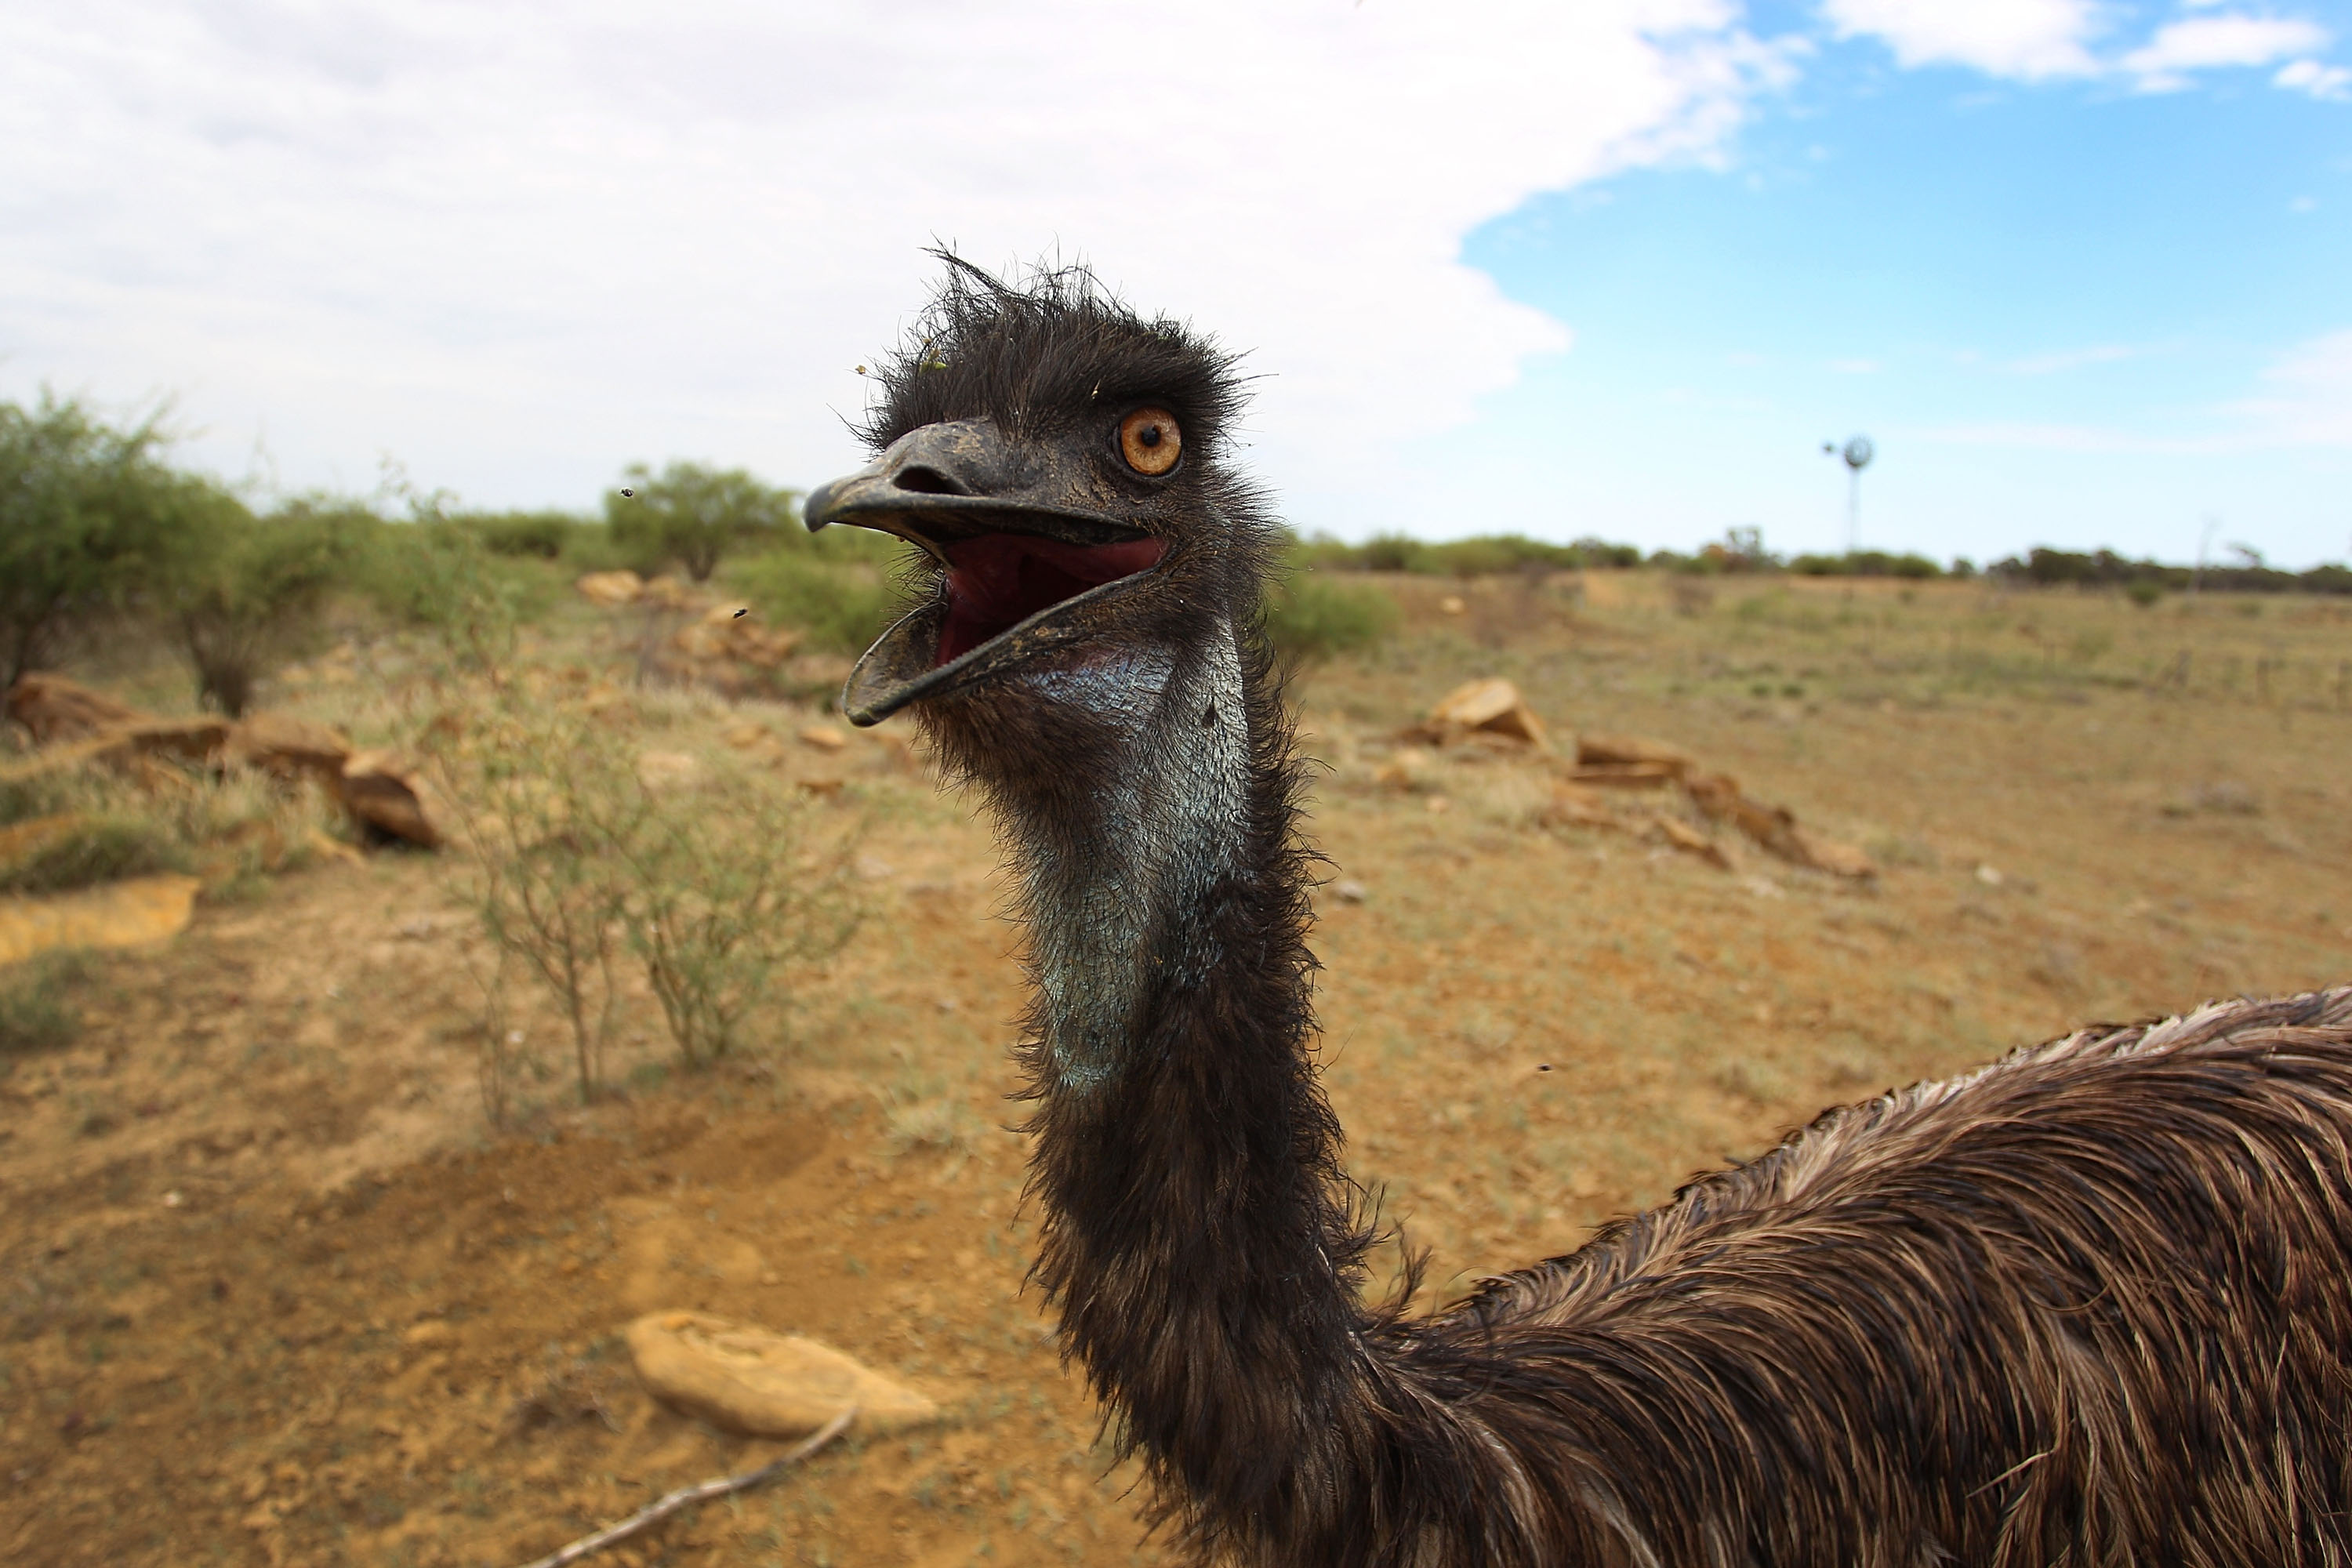 A emu fondly named 'Stan' is seen during a water run, abandoned just after hatching he was found while mustering on a neighbouring property and was raised and now released by the Walkers onto 'Rio Station' on March 19, 2014 in Longreach, Australia. Queensland, Australia's second-largest state, is currently suffering from its widest spread drought on record. Almost 80% of the region is now declared affected. The Australian government recently approved an emergency drought relief package of A$320m, of which at least A$280m is allocated for loans to assist eligible farm businesses to recover. (Photo by Lisa Maree Williams/Getty Images)